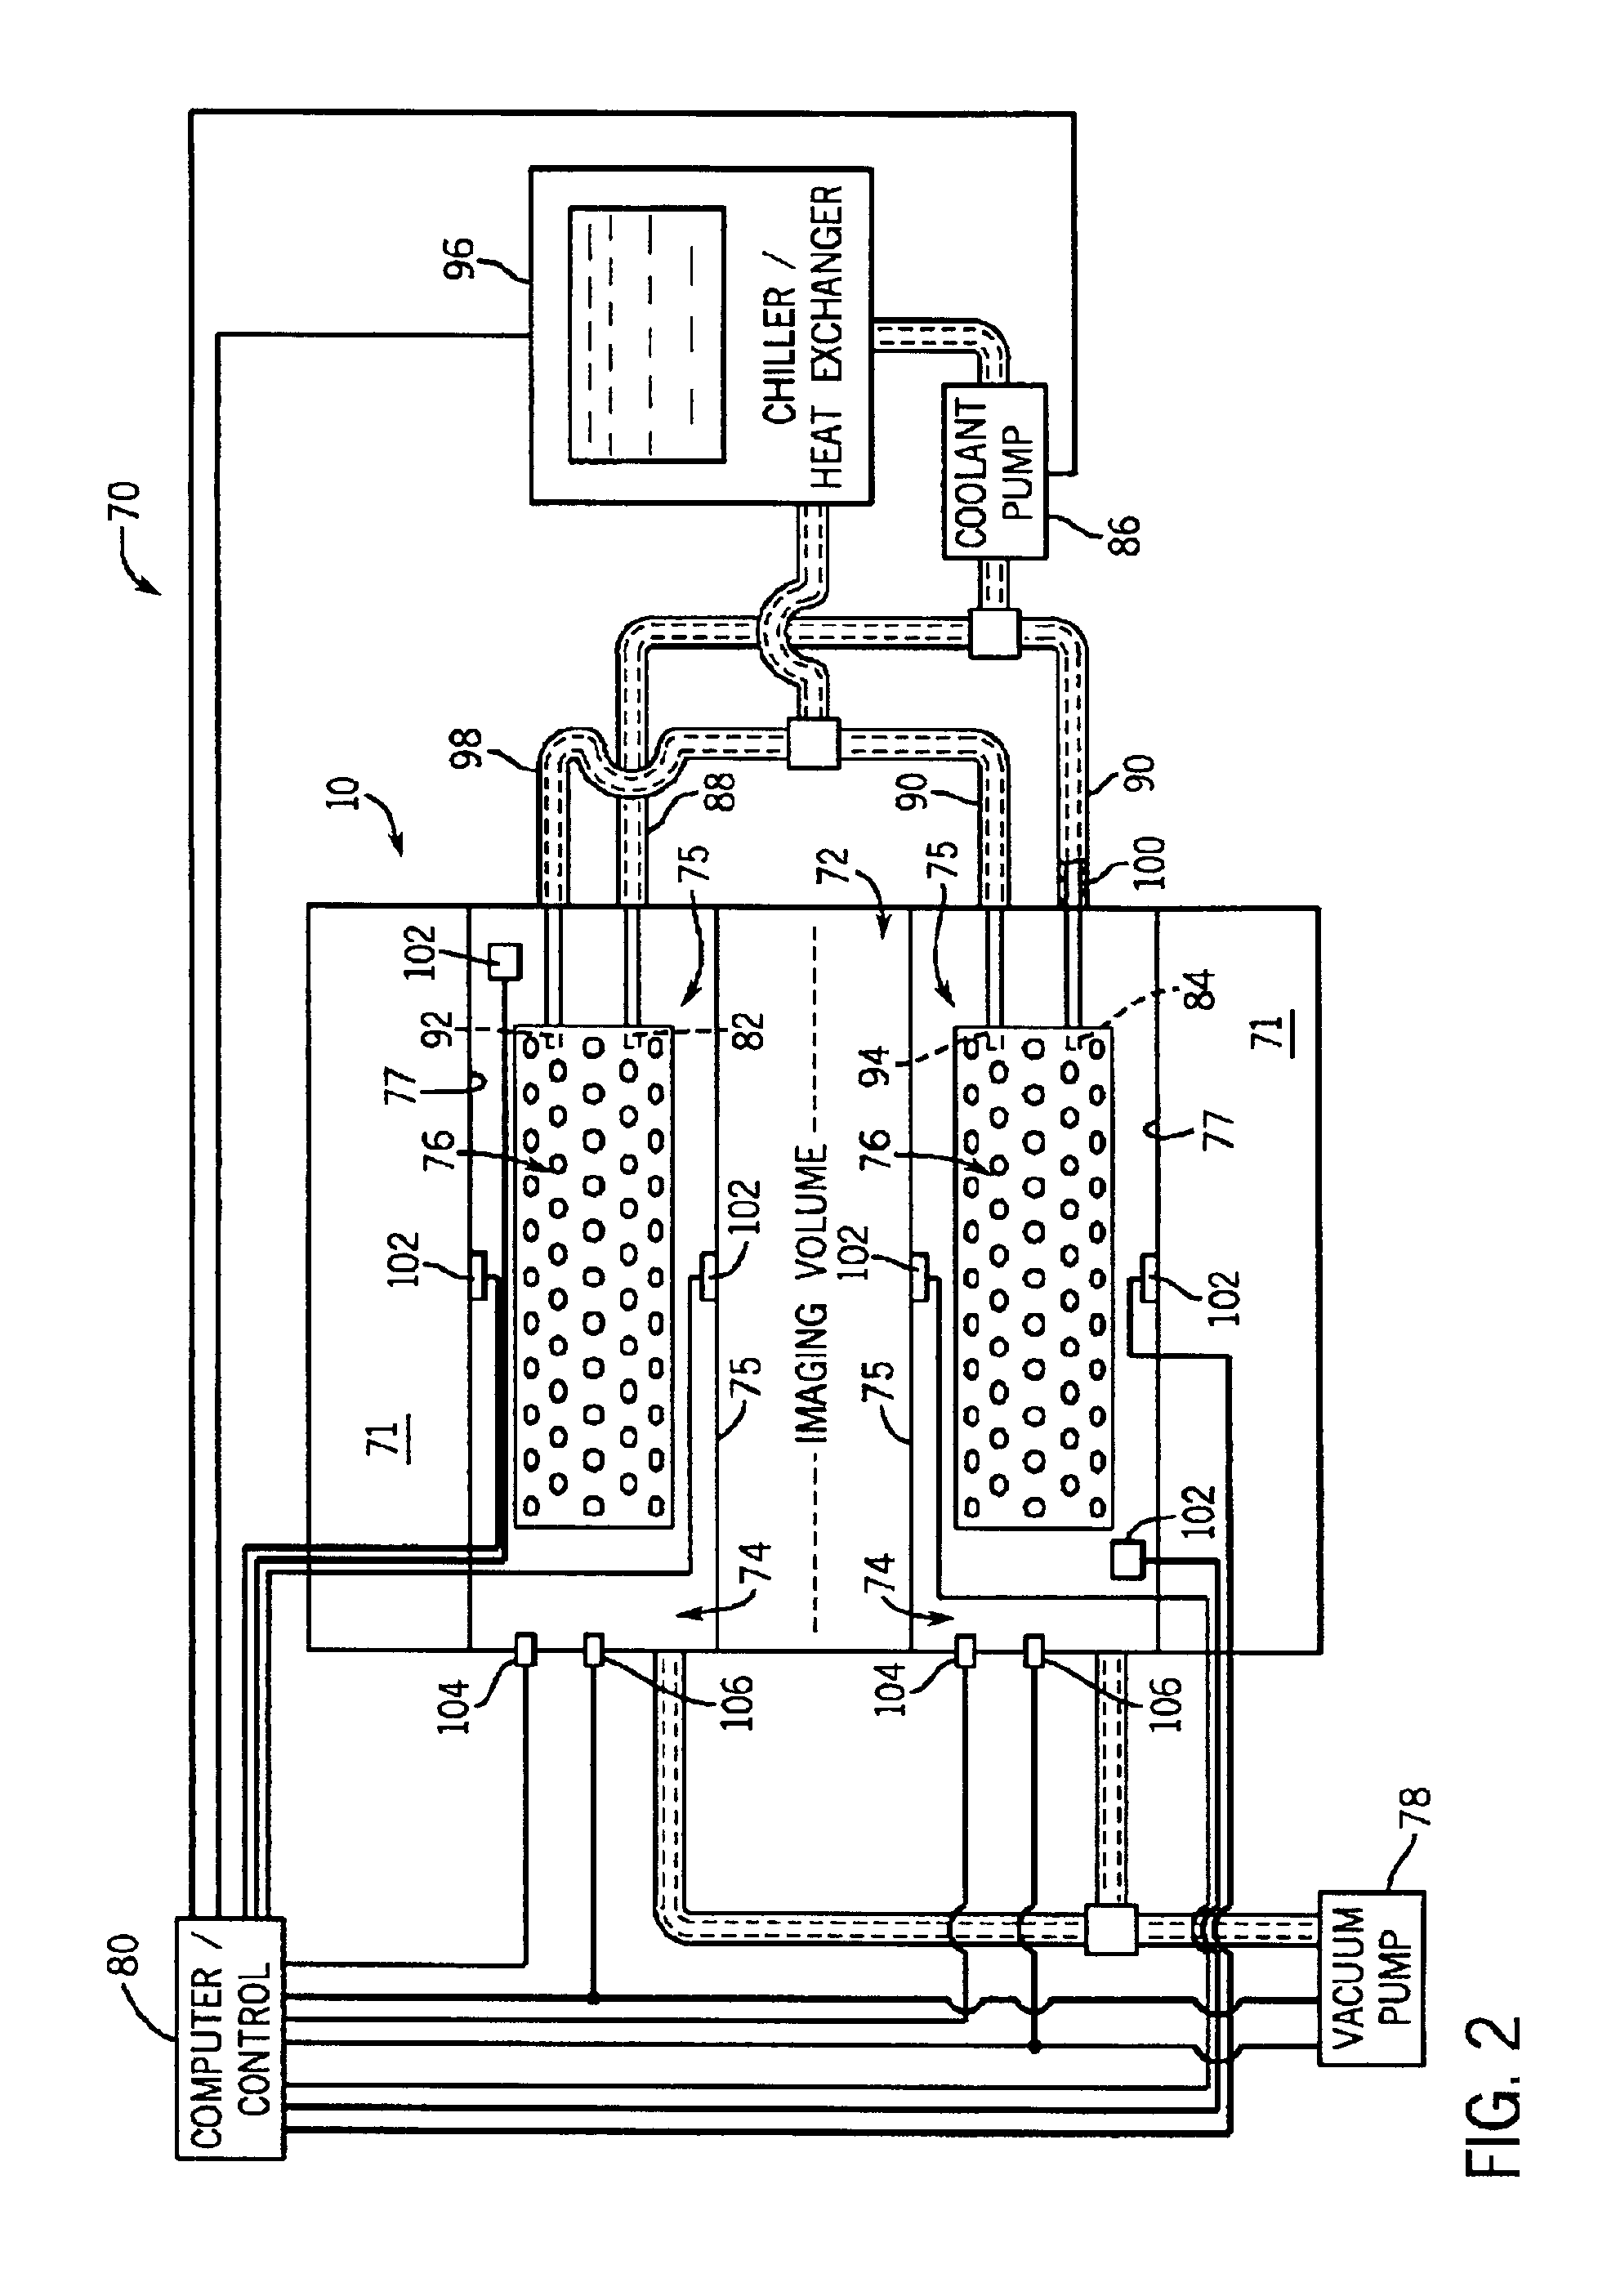 Method and system to regulate cooling of a medical imaging device